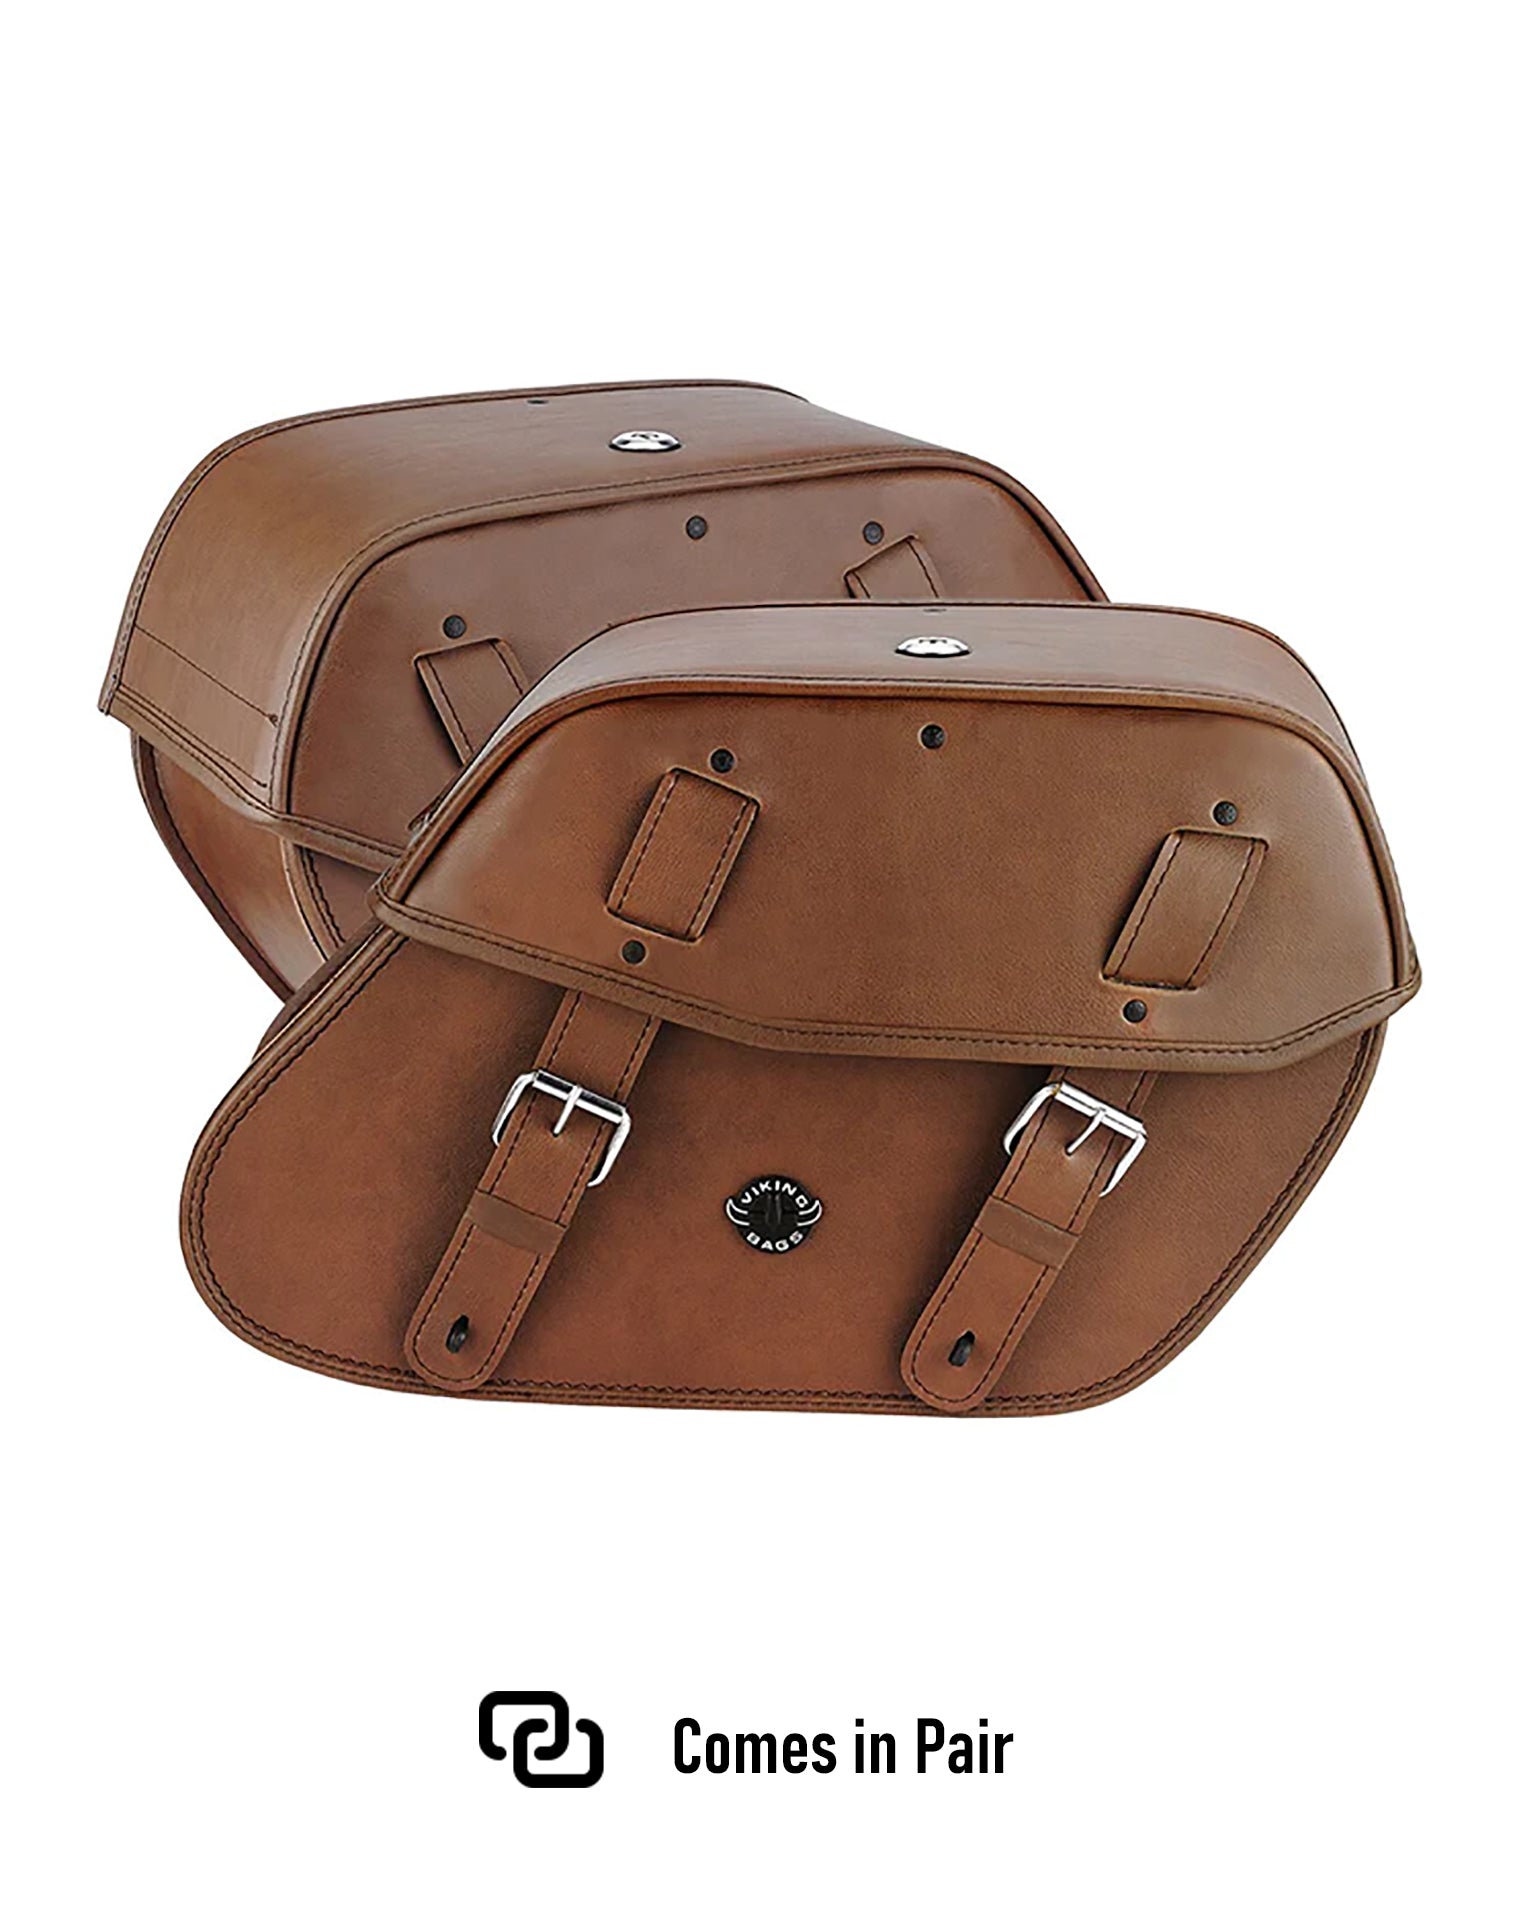 Viking Odin Brown Large Honda Vtx 1300 R Retro Leather Motorcycle Saddlebags Weather Resistant Bags Comes in Pair